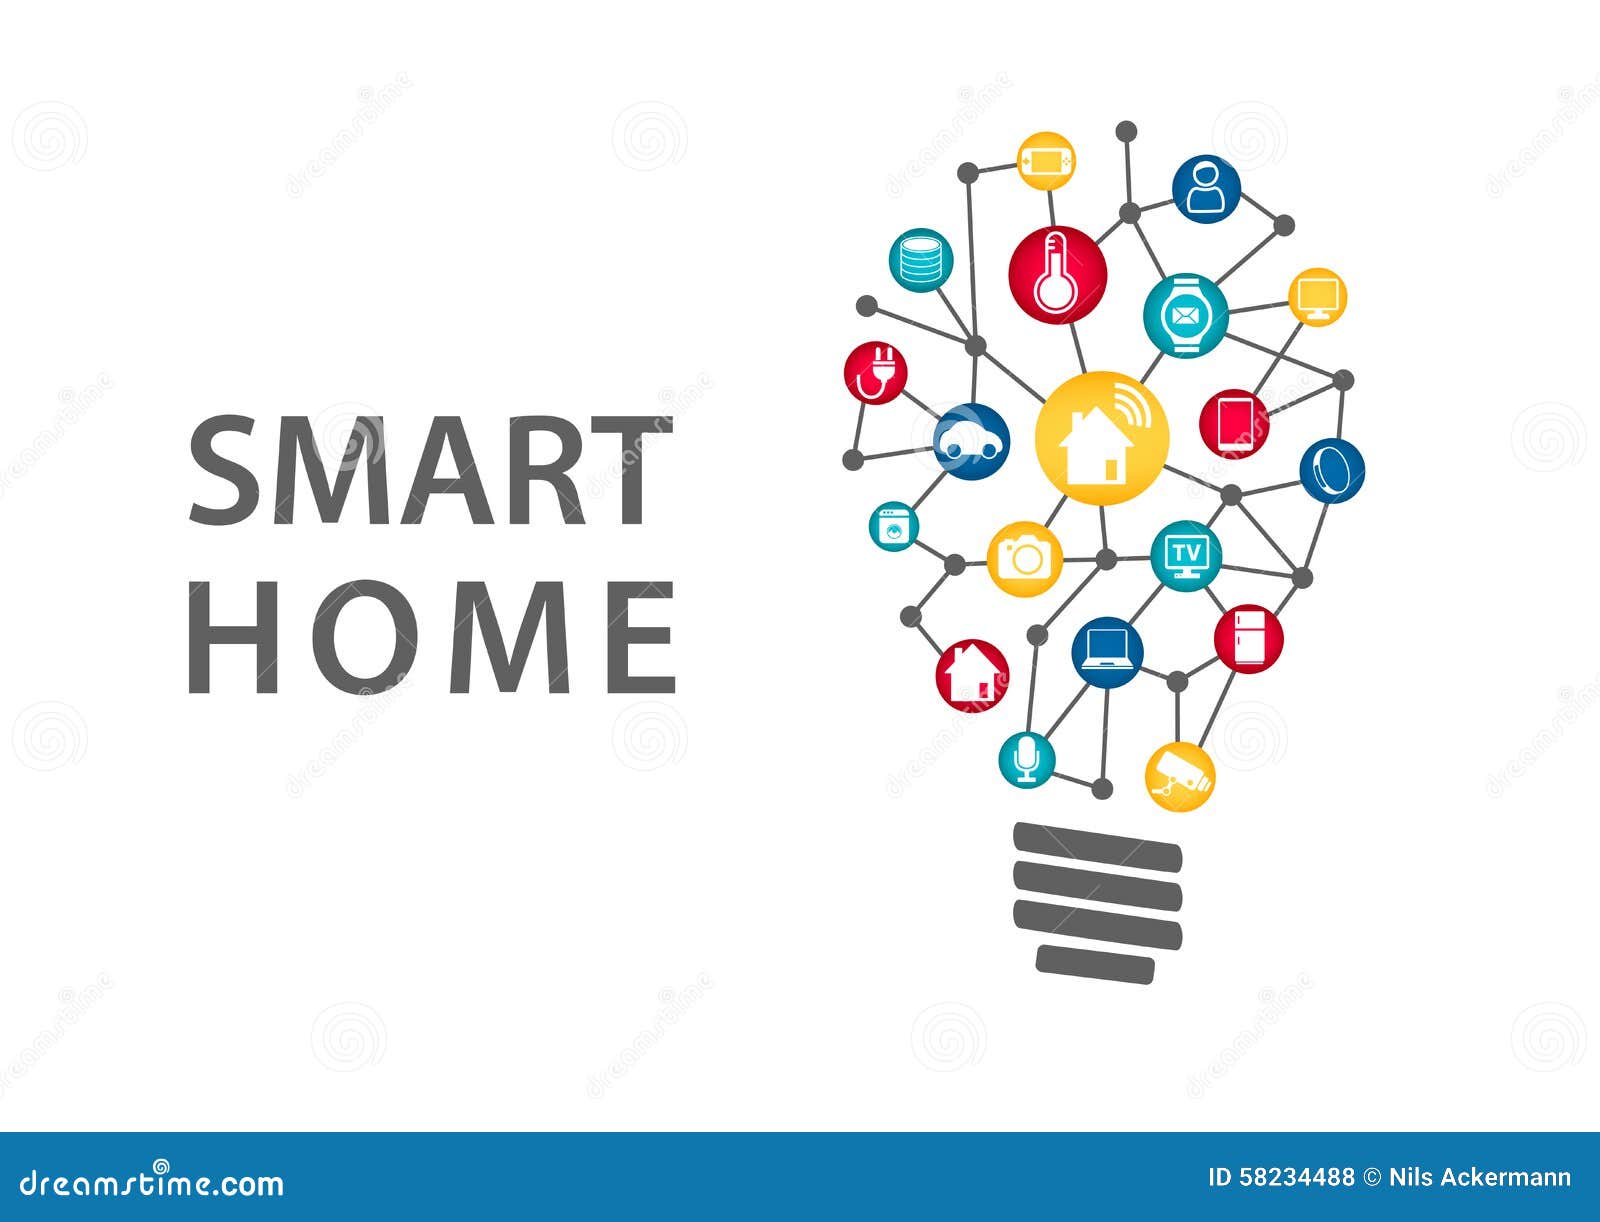 home automation clipart - photo #18